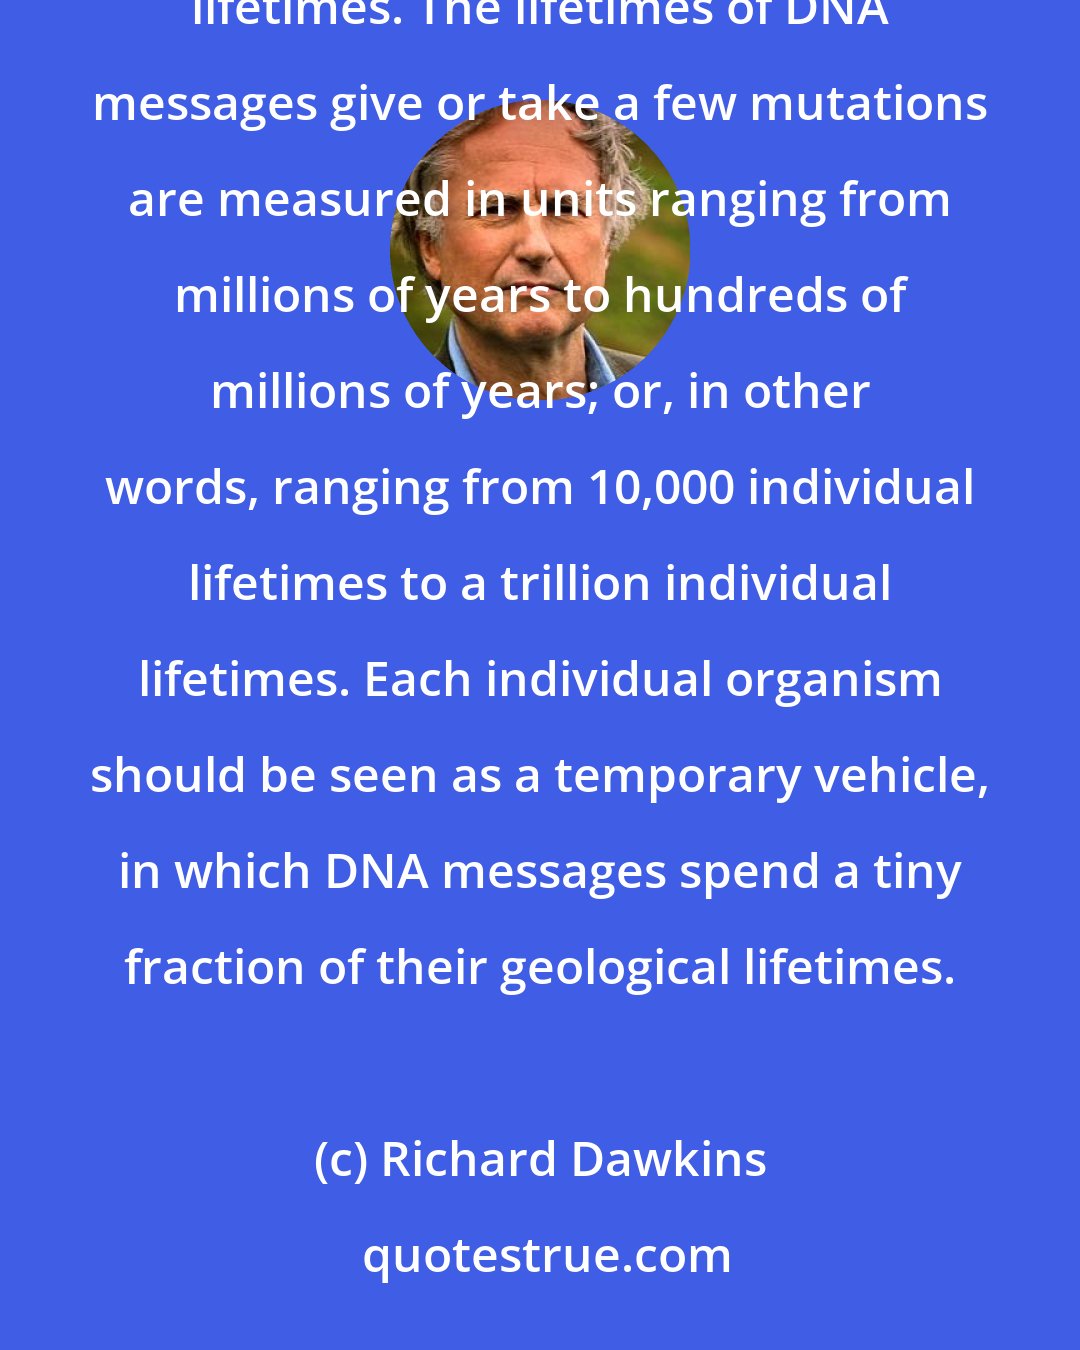 Richard Dawkins: The messages that DNA molecules contain are all but eternal when seen against the time scale of individual lifetimes. The lifetimes of DNA messages give or take a few mutations are measured in units ranging from millions of years to hundreds of millions of years; or, in other words, ranging from 10,000 individual lifetimes to a trillion individual lifetimes. Each individual organism should be seen as a temporary vehicle, in which DNA messages spend a tiny fraction of their geological lifetimes.